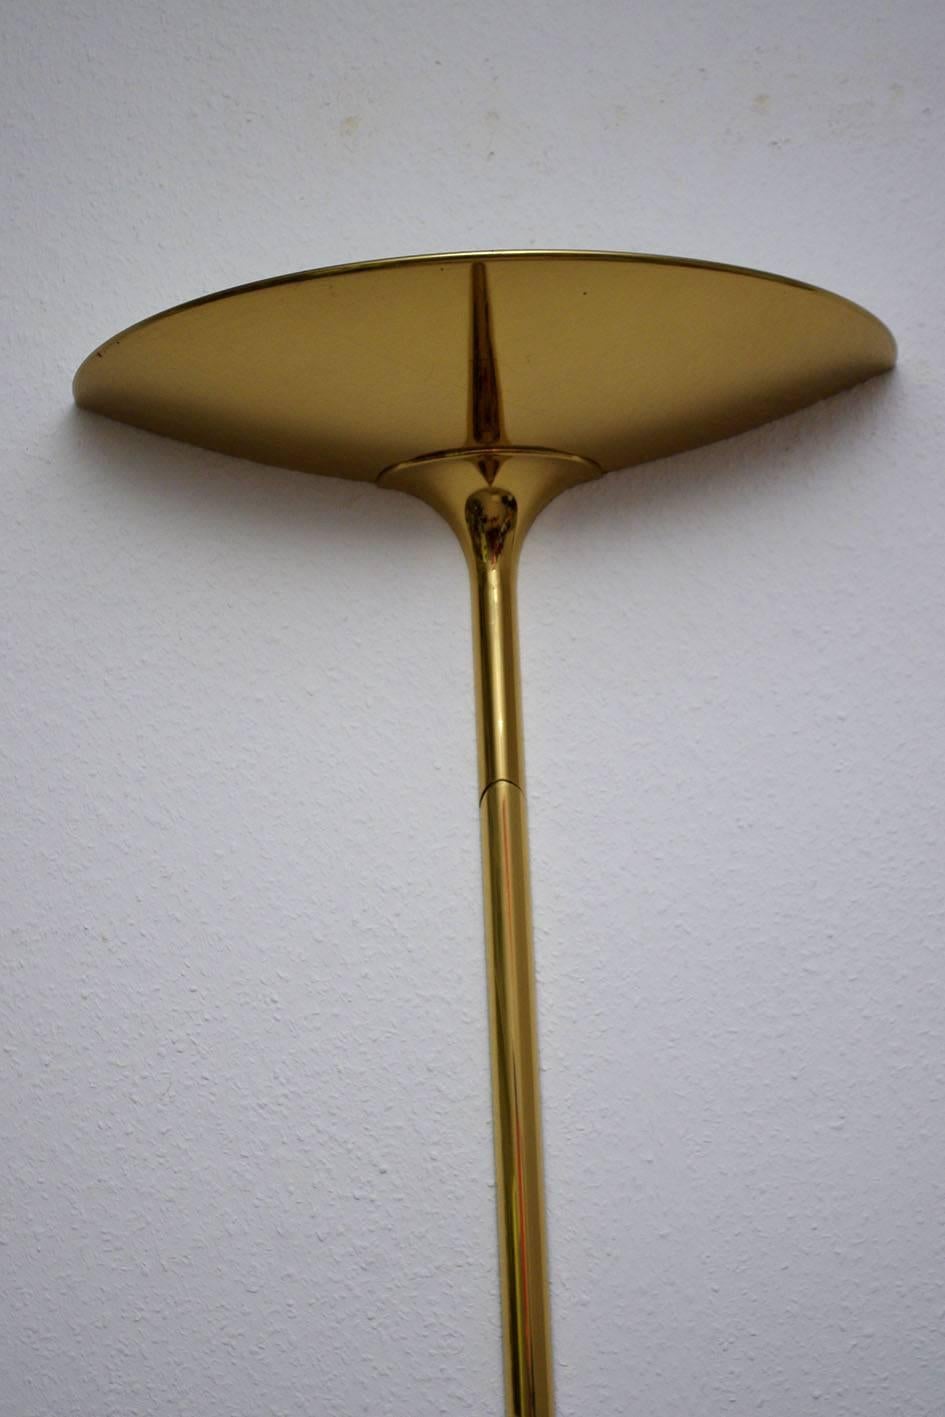 Very rare large solid brass wall light by Florian Schulz.
Germany, 1960s.

Measurements:
Height: 64 In or 15 In
lamp sockets: 2x E27 (US E26)